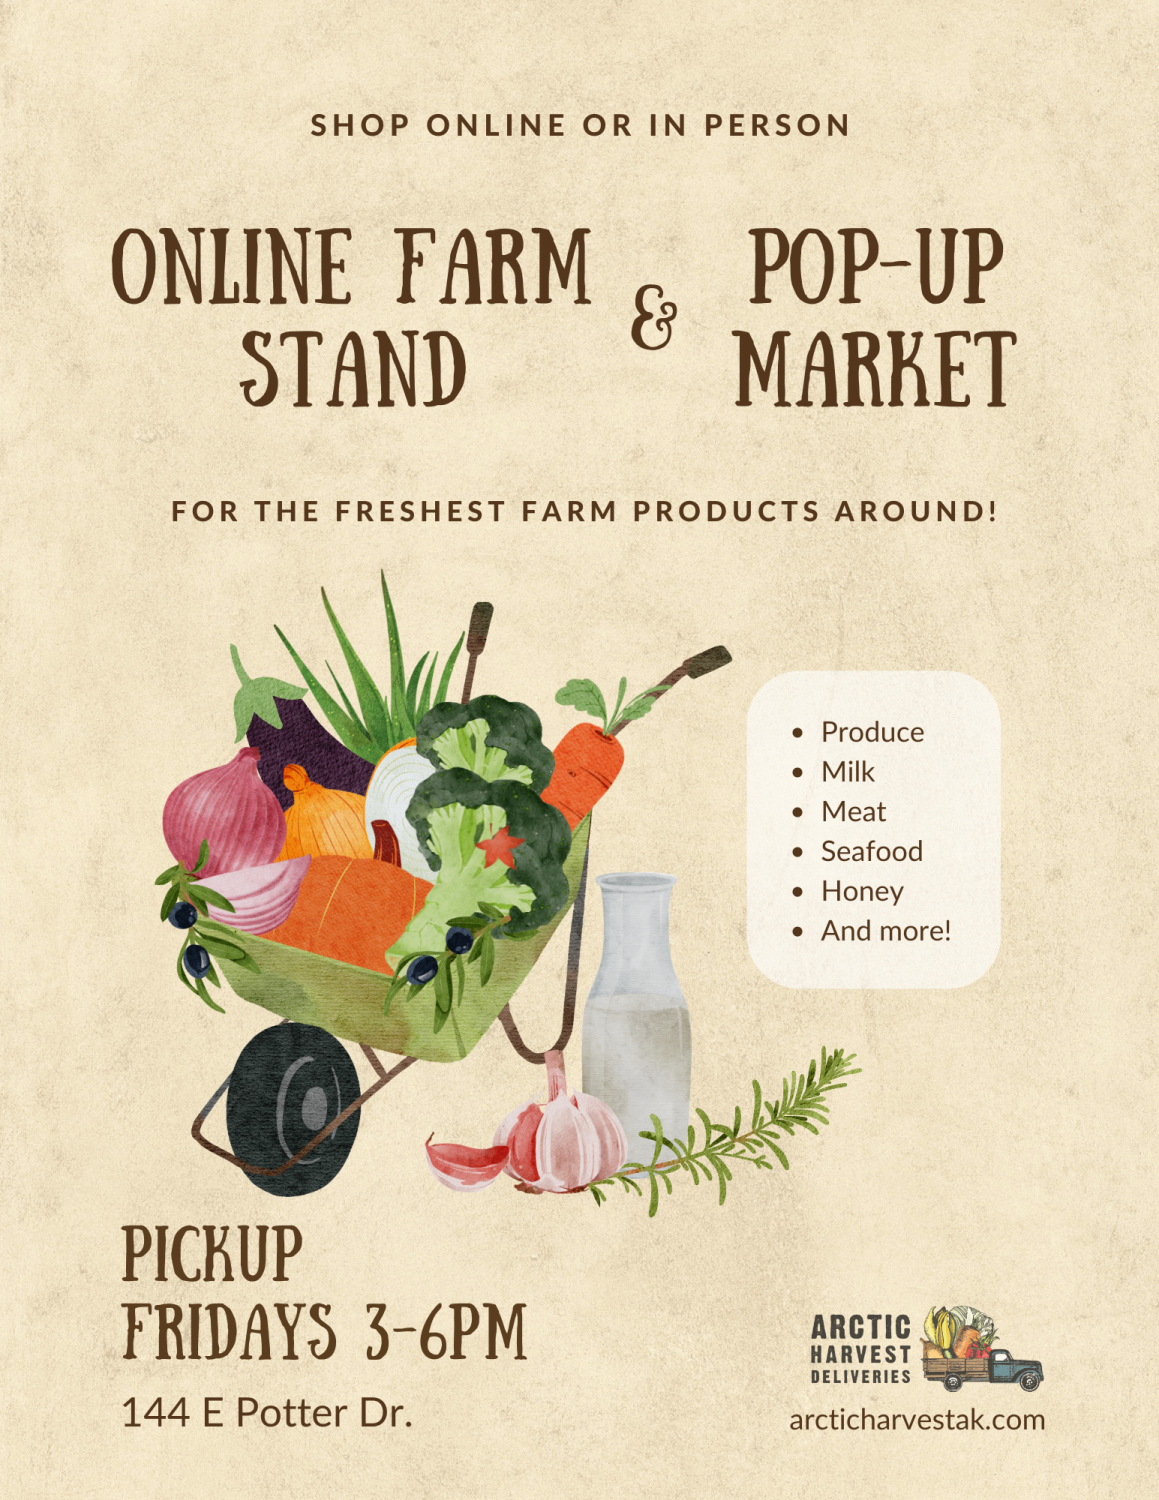 Next Happening: Fall Farm Stand + Pop Up Market!